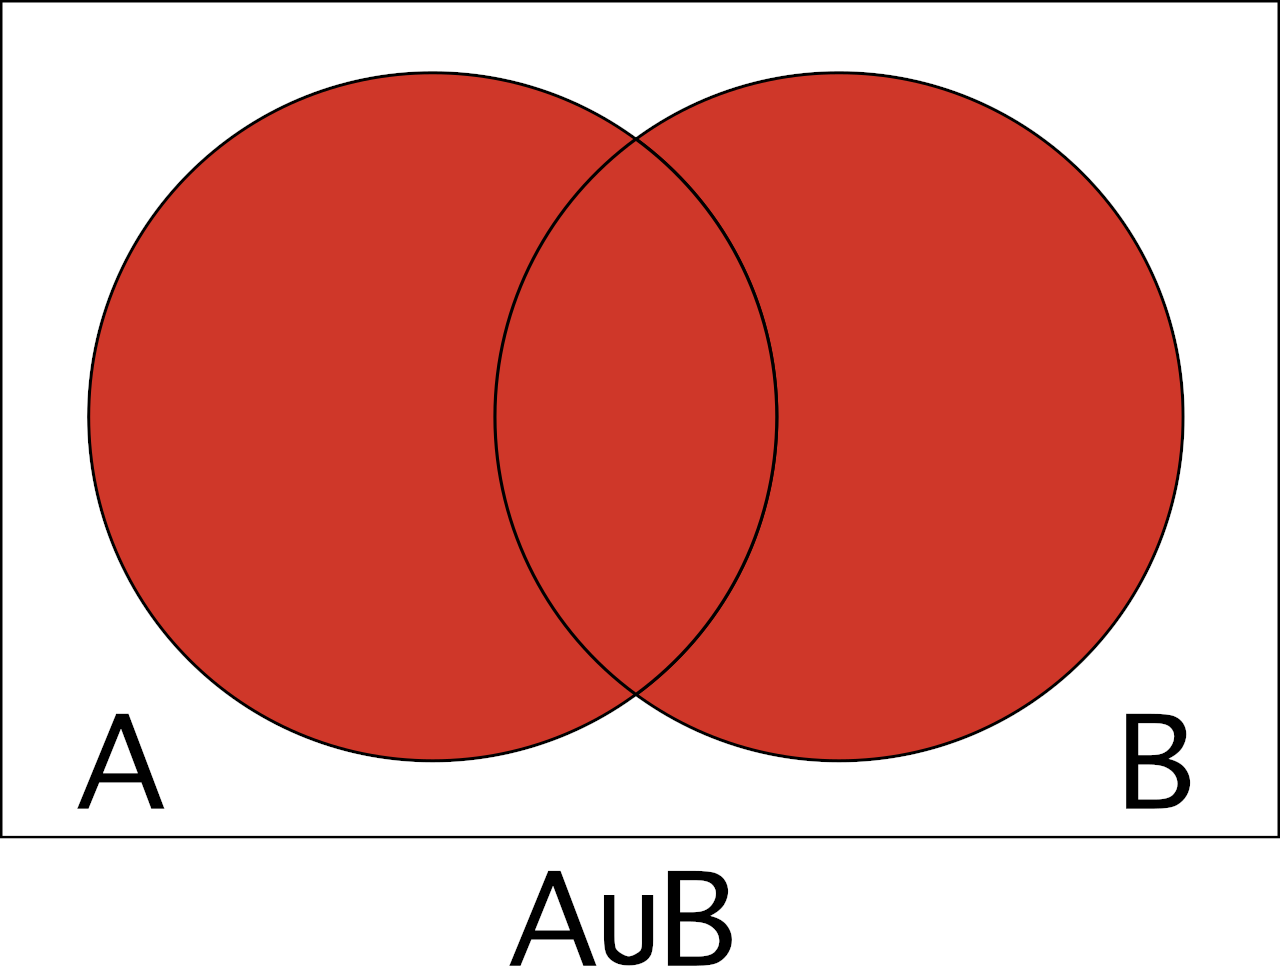 Venn diagram to help visualize the union of A and B